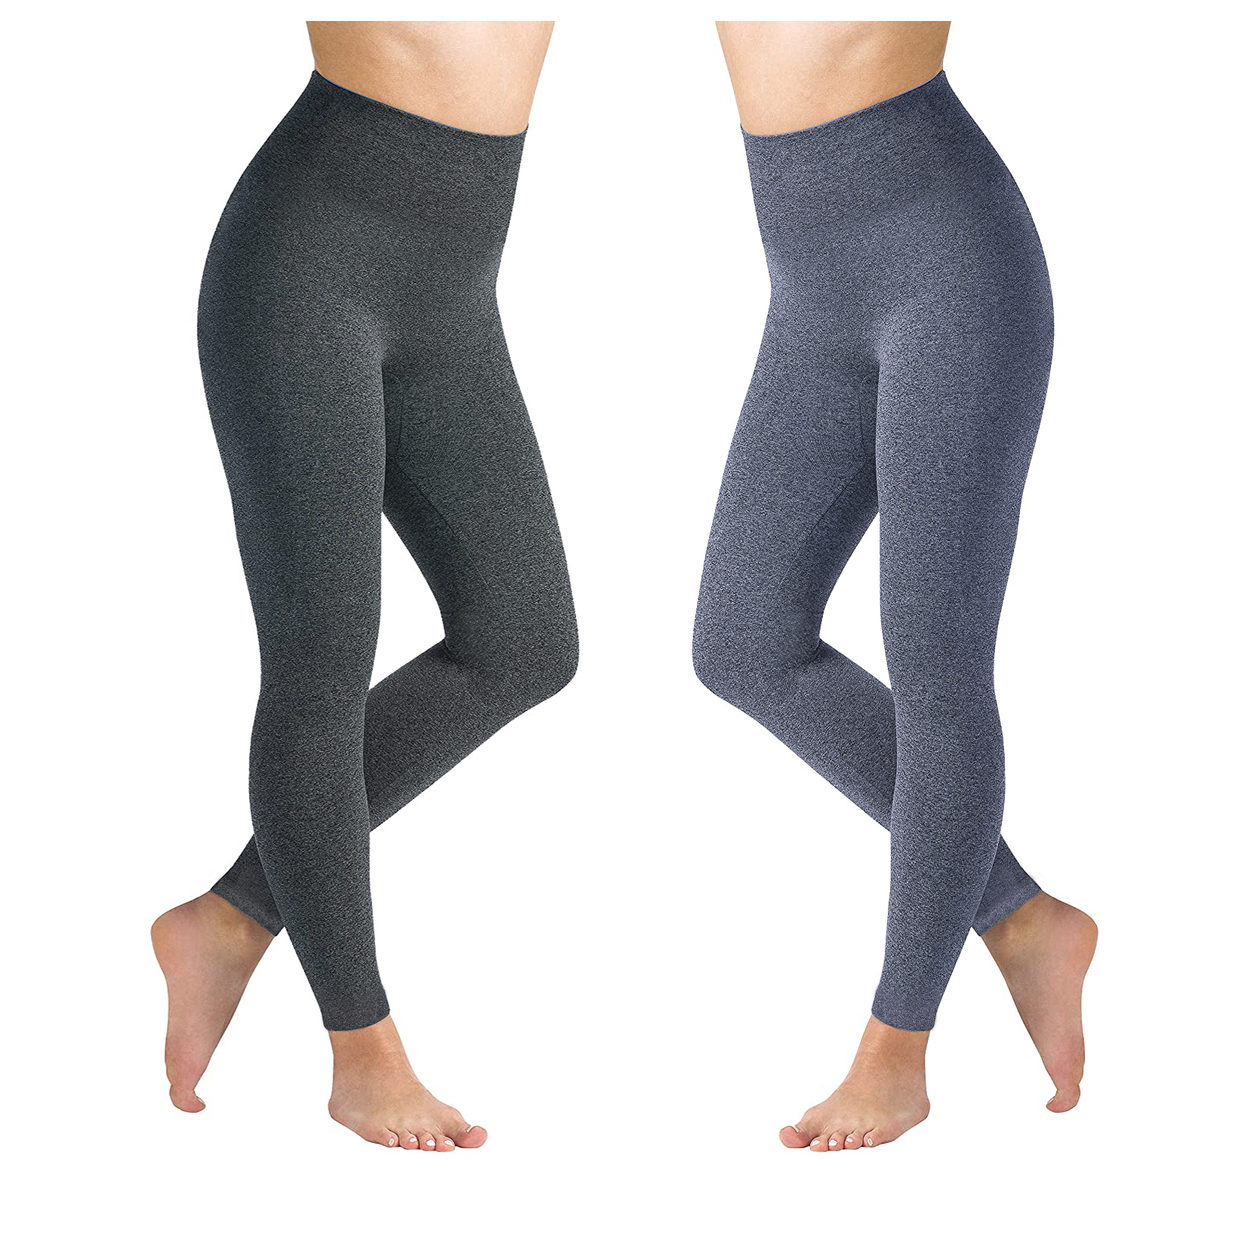 2-Pack: Women's High Waisted Ultra Soft Fleece Lined Warm Marled Leggings(Available In Plus Sizes) - Navy & Navy, Medium